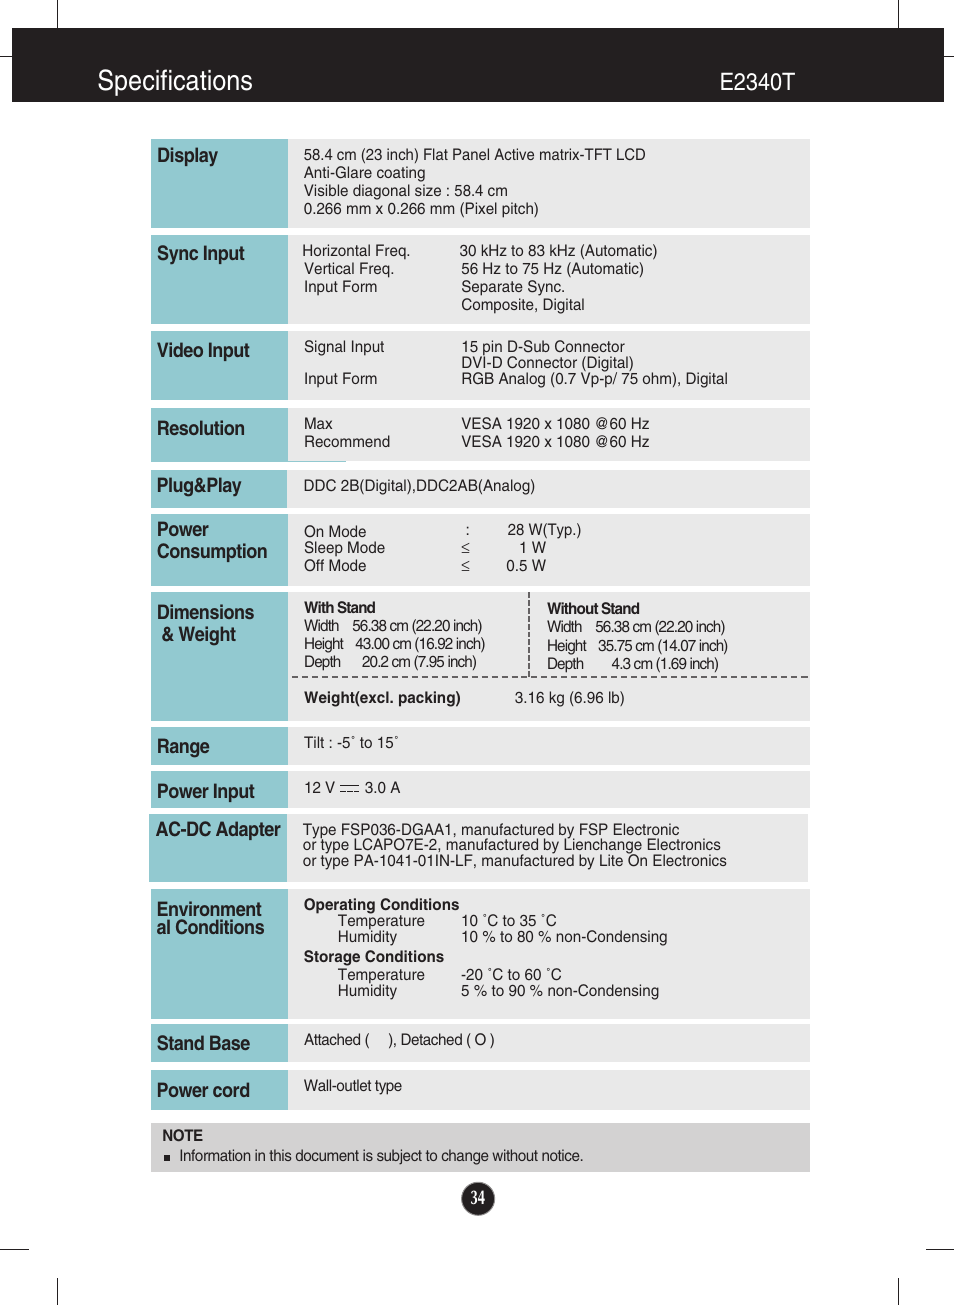 E2340t, Specifications | LG E2040T-PN User Manual | Page 35 / 39